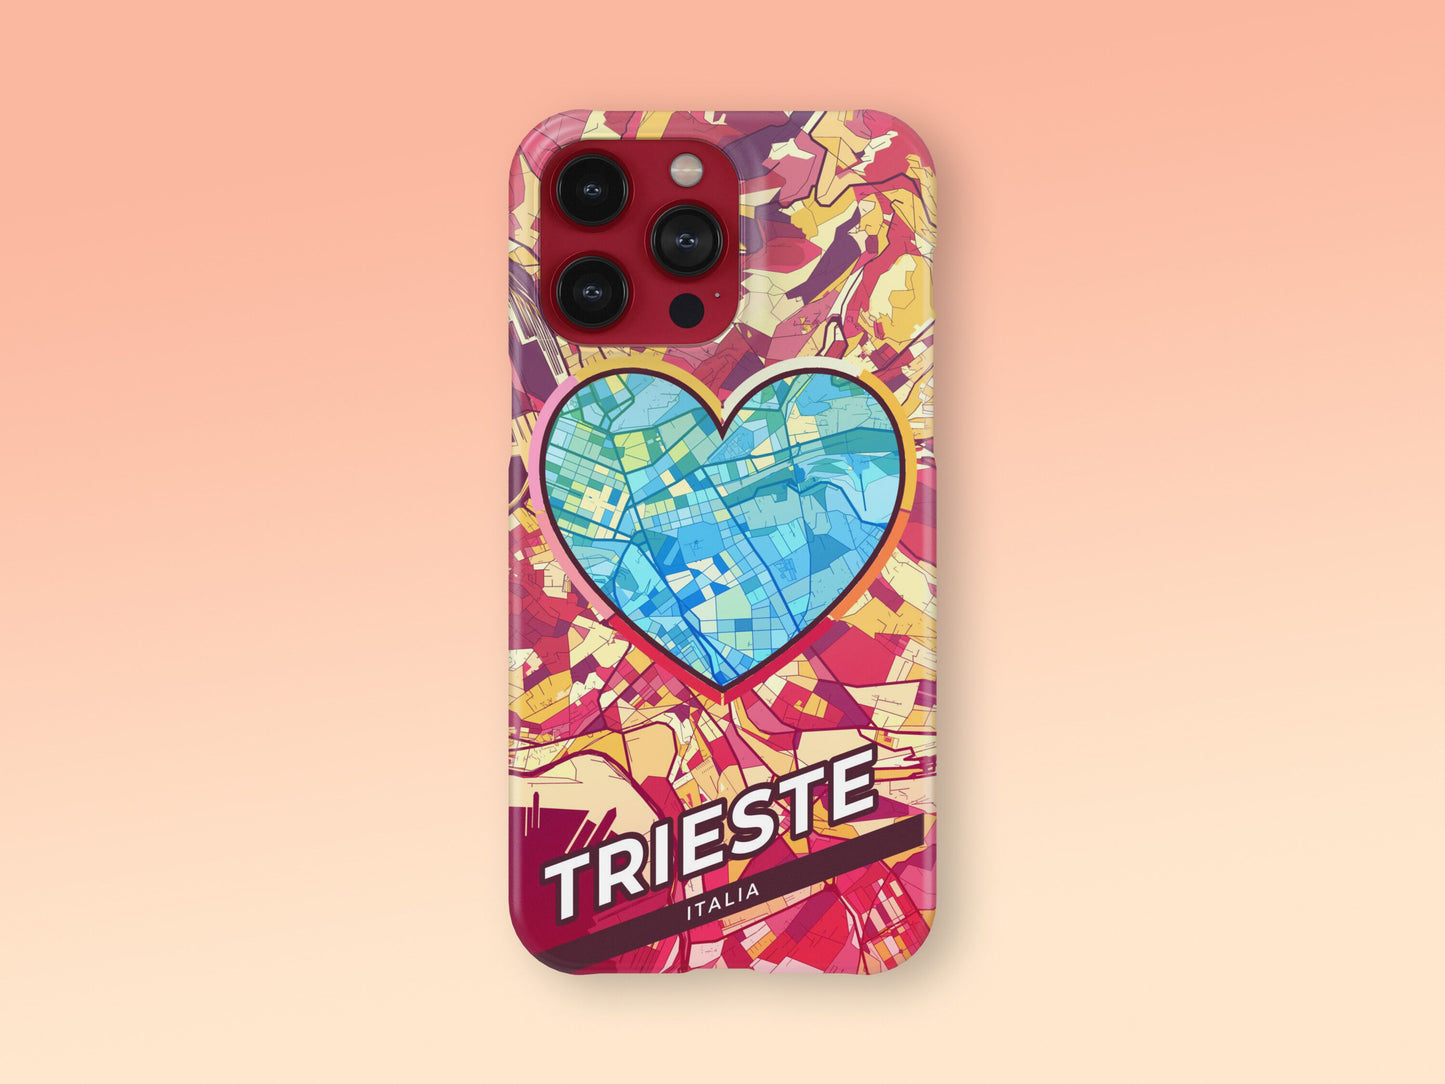 Trieste Italy slim phone case with colorful icon 2